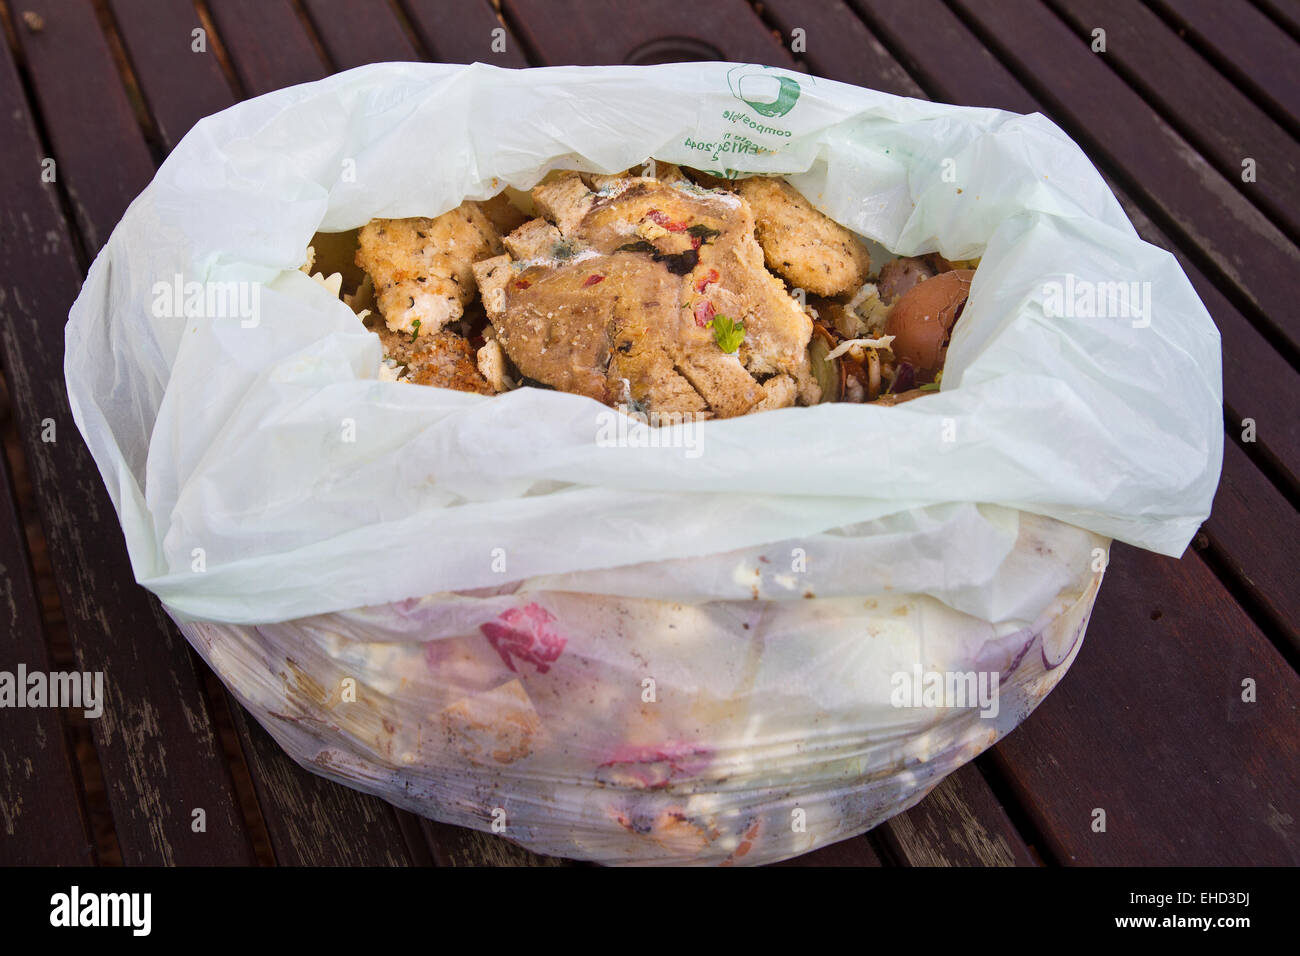 food waste in recycling caddy Stock Photo